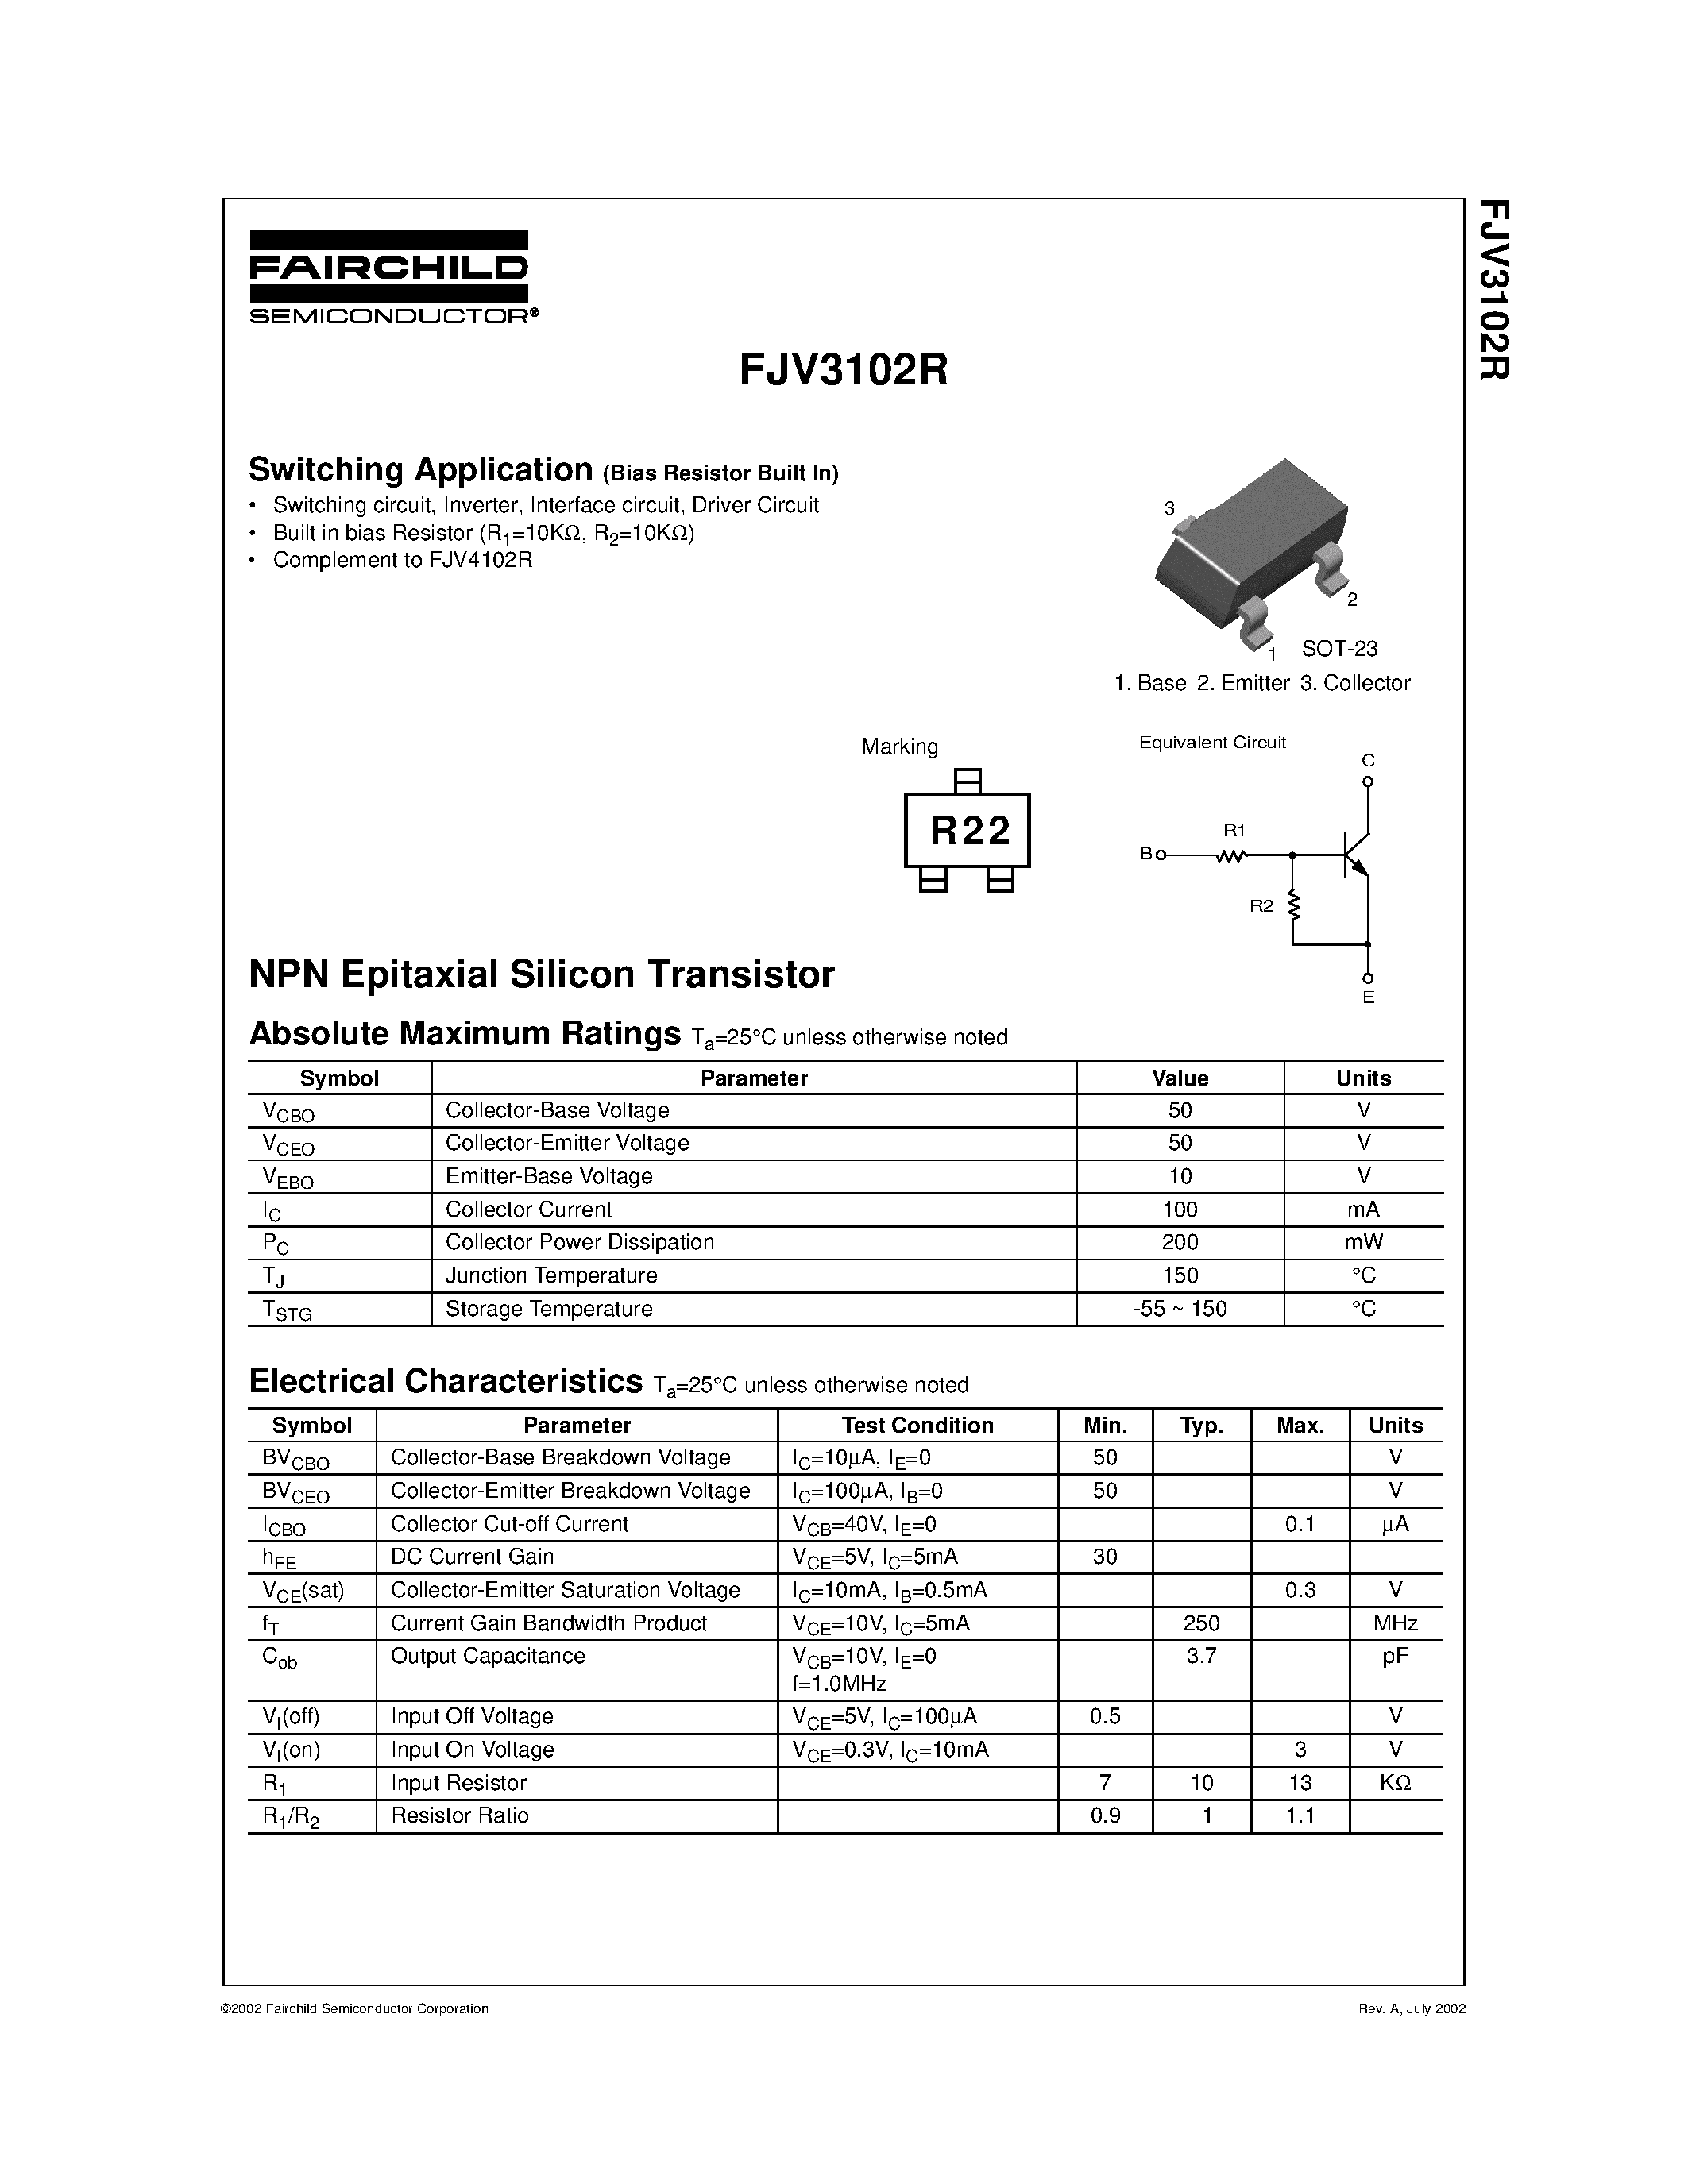 Datasheet FJV3102R - NPN Epitaxial Silicon Transistor page 1